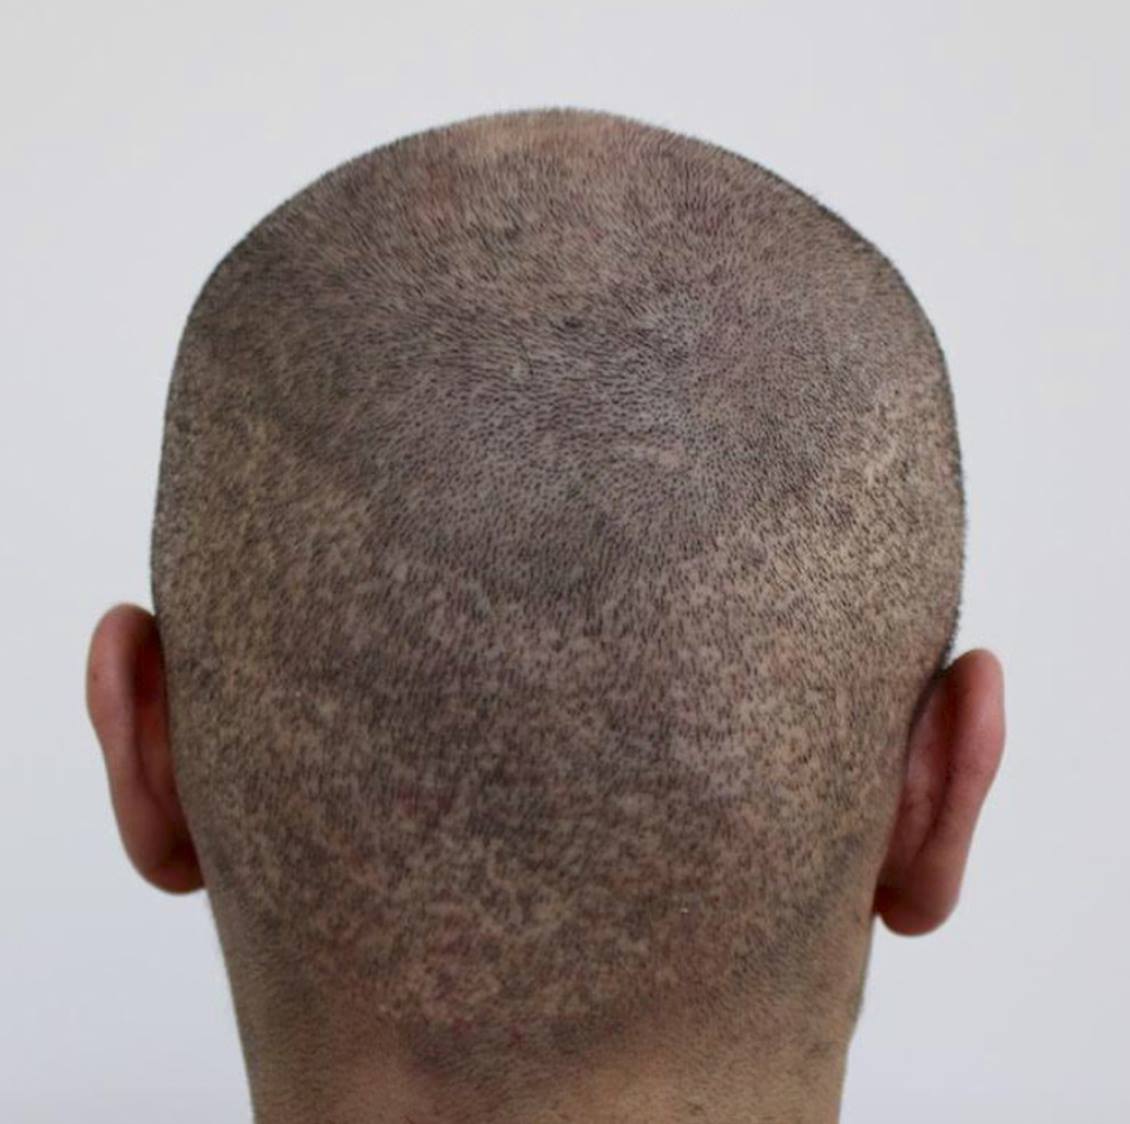 Thinned out donor area after botched Turkey hair transplant: Before with shaving - 2